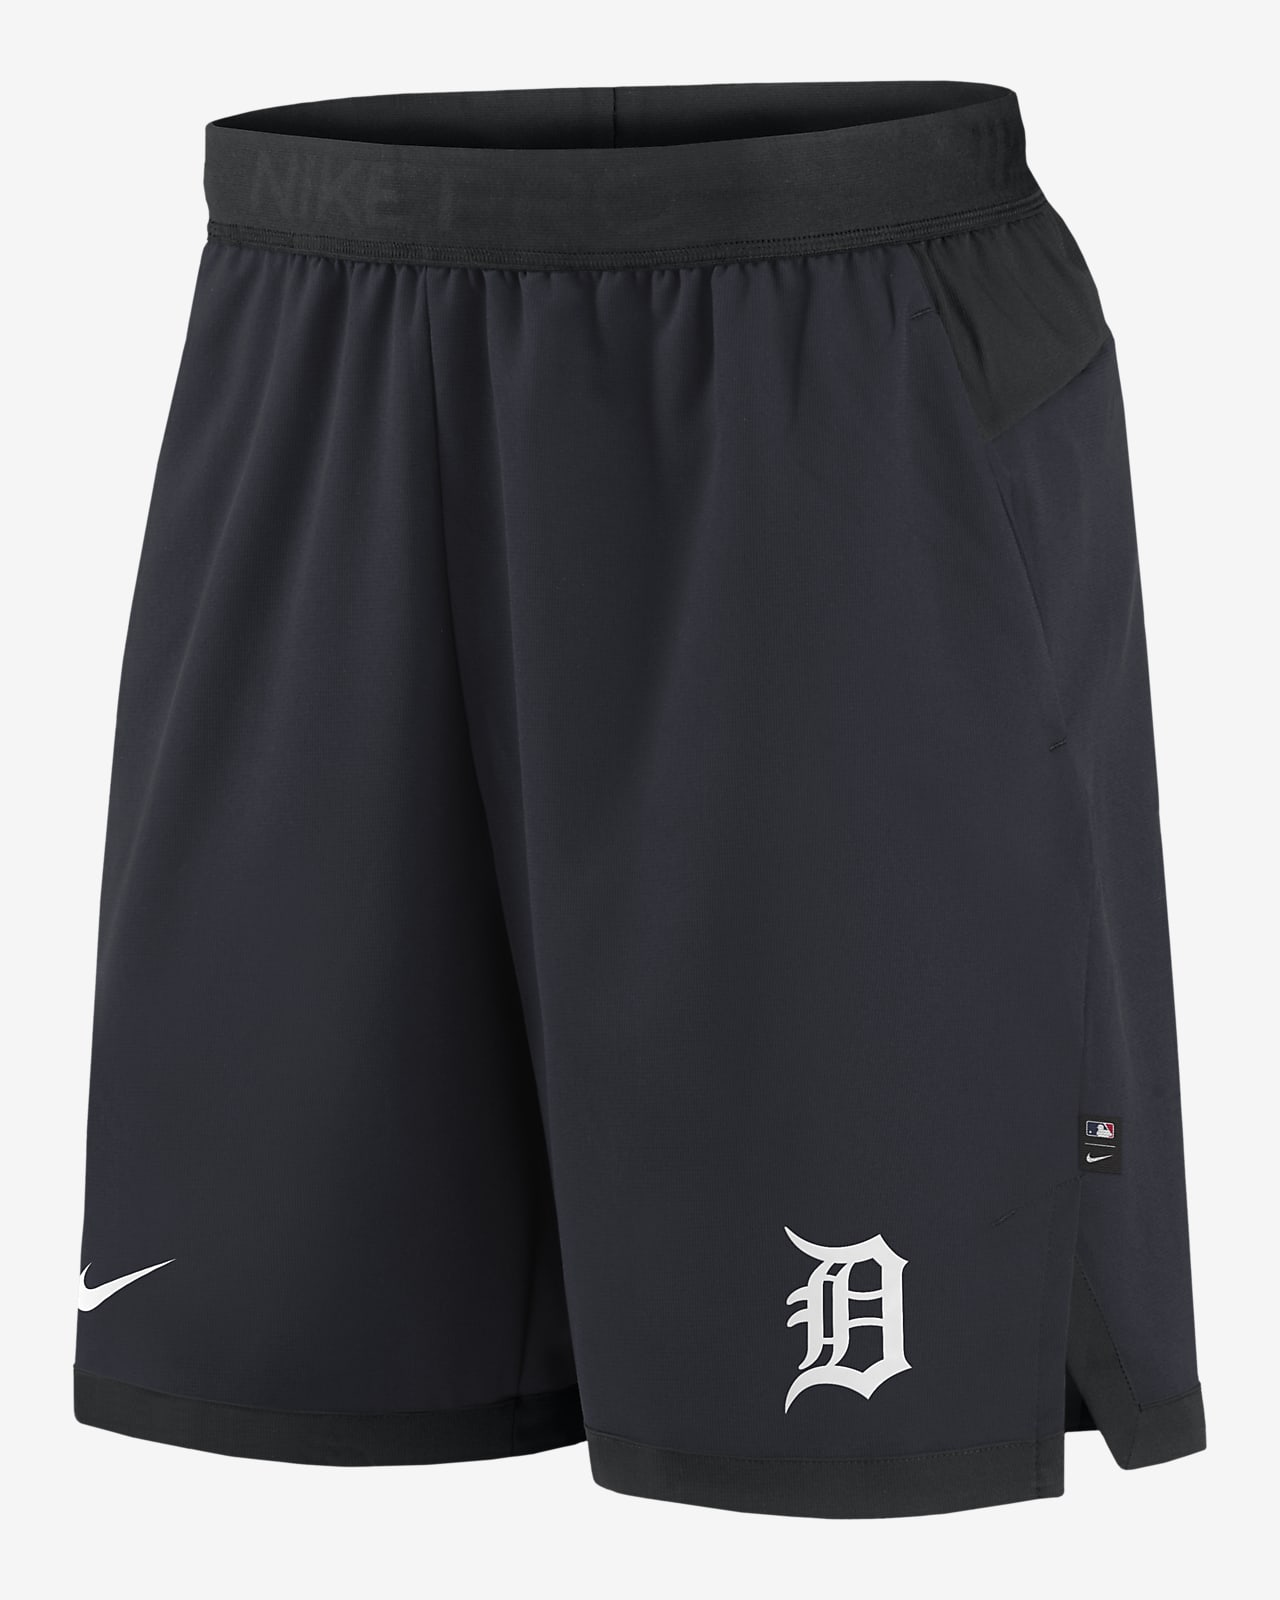 Original Youth Detroit Tigers Nike Collection Legend Performance T